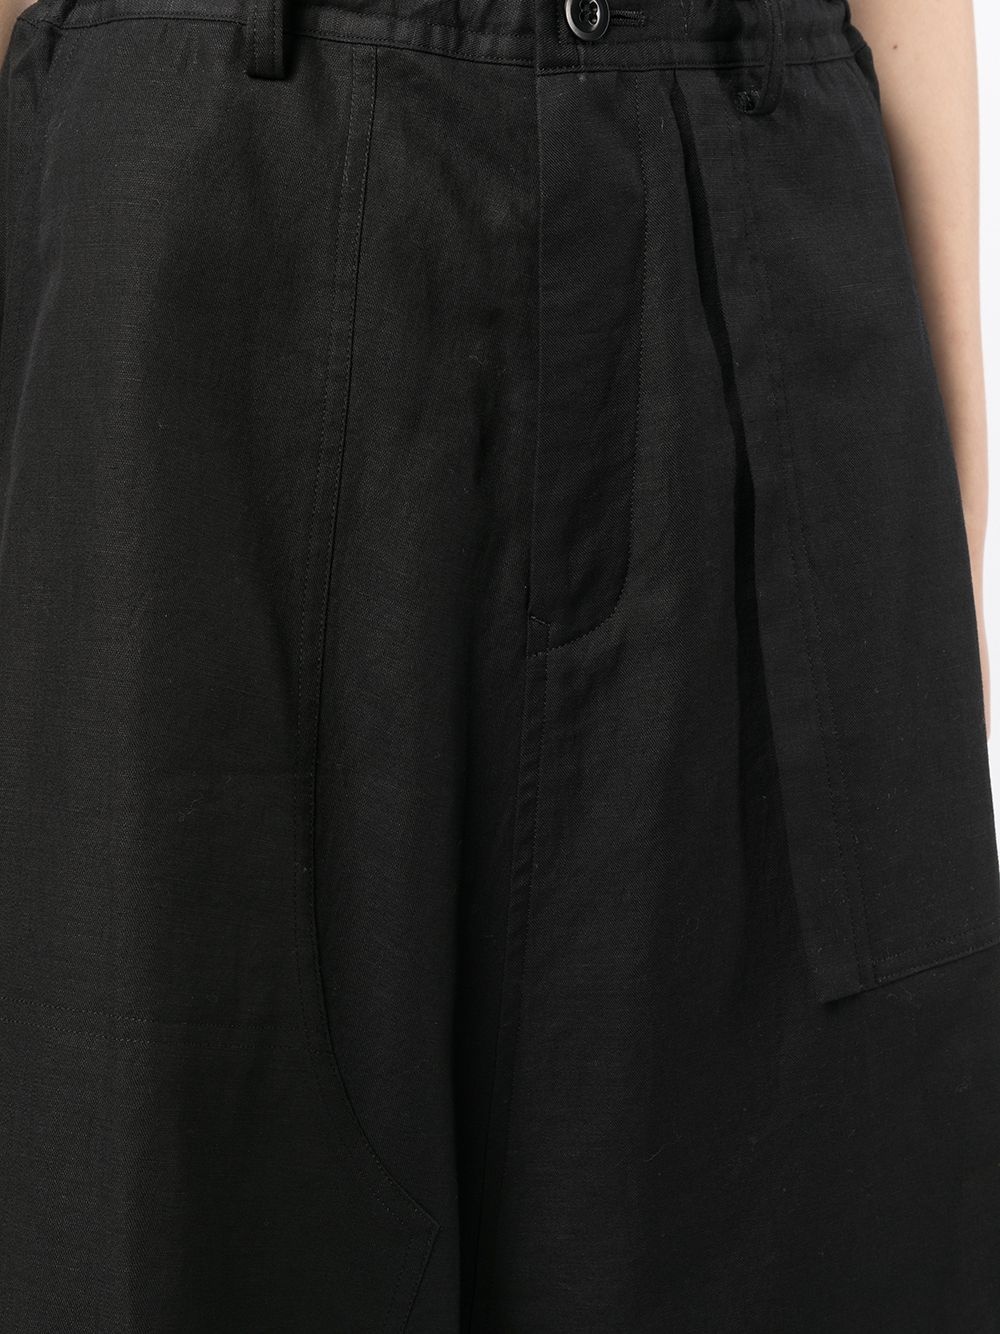 flared culotte trousers - 5